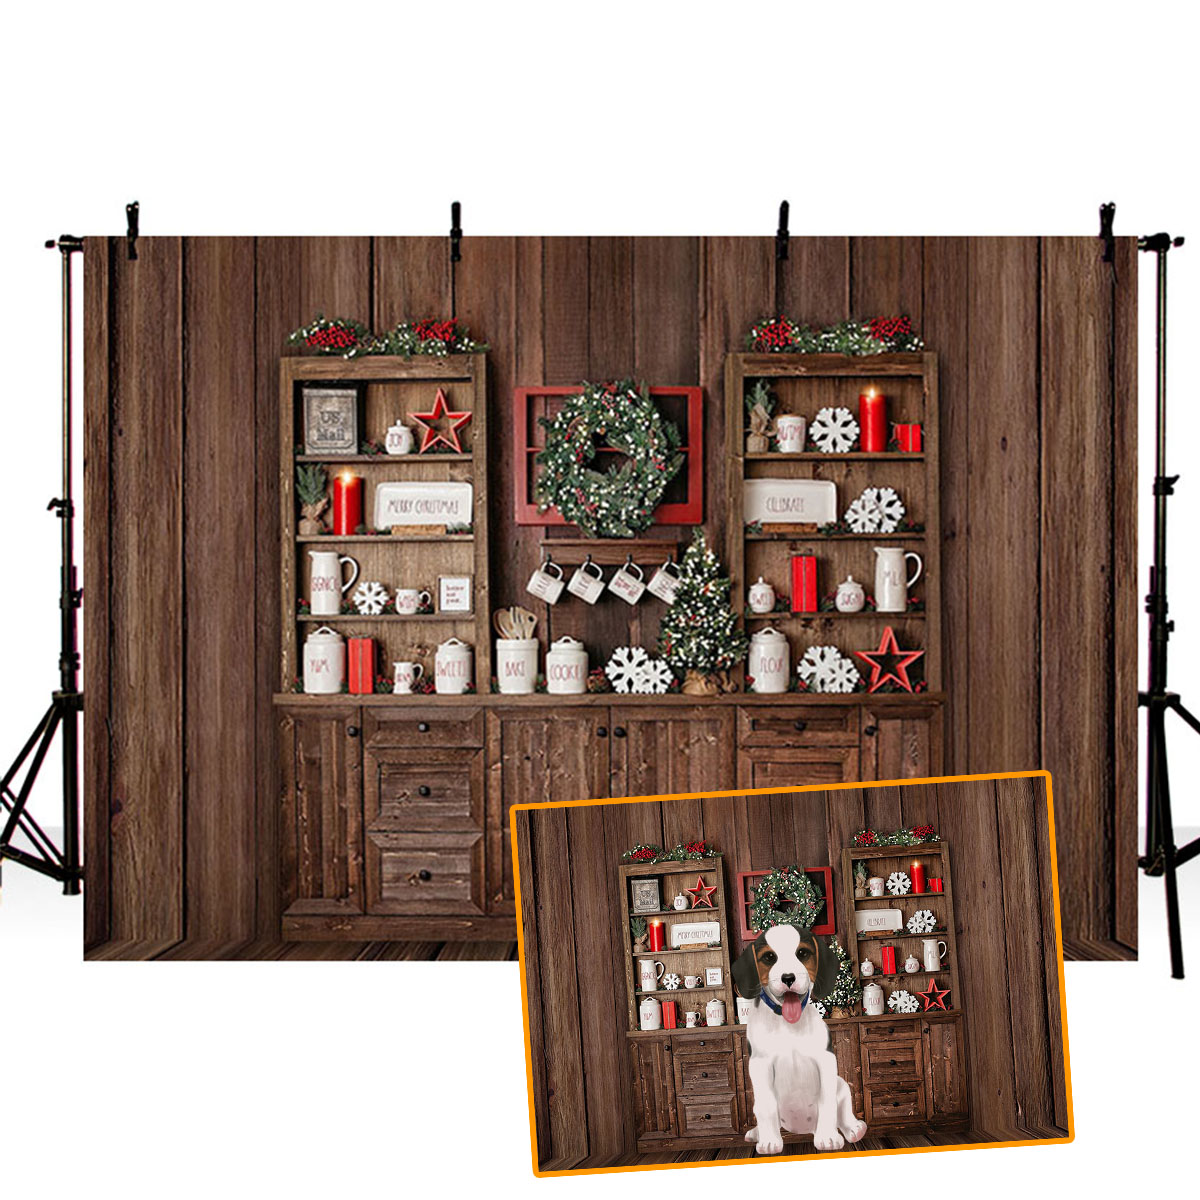 

5x3FT 7x5FT 8x6FT Wooden Wall Christmas Cabinet Photography Backdrop Background Studio Prop